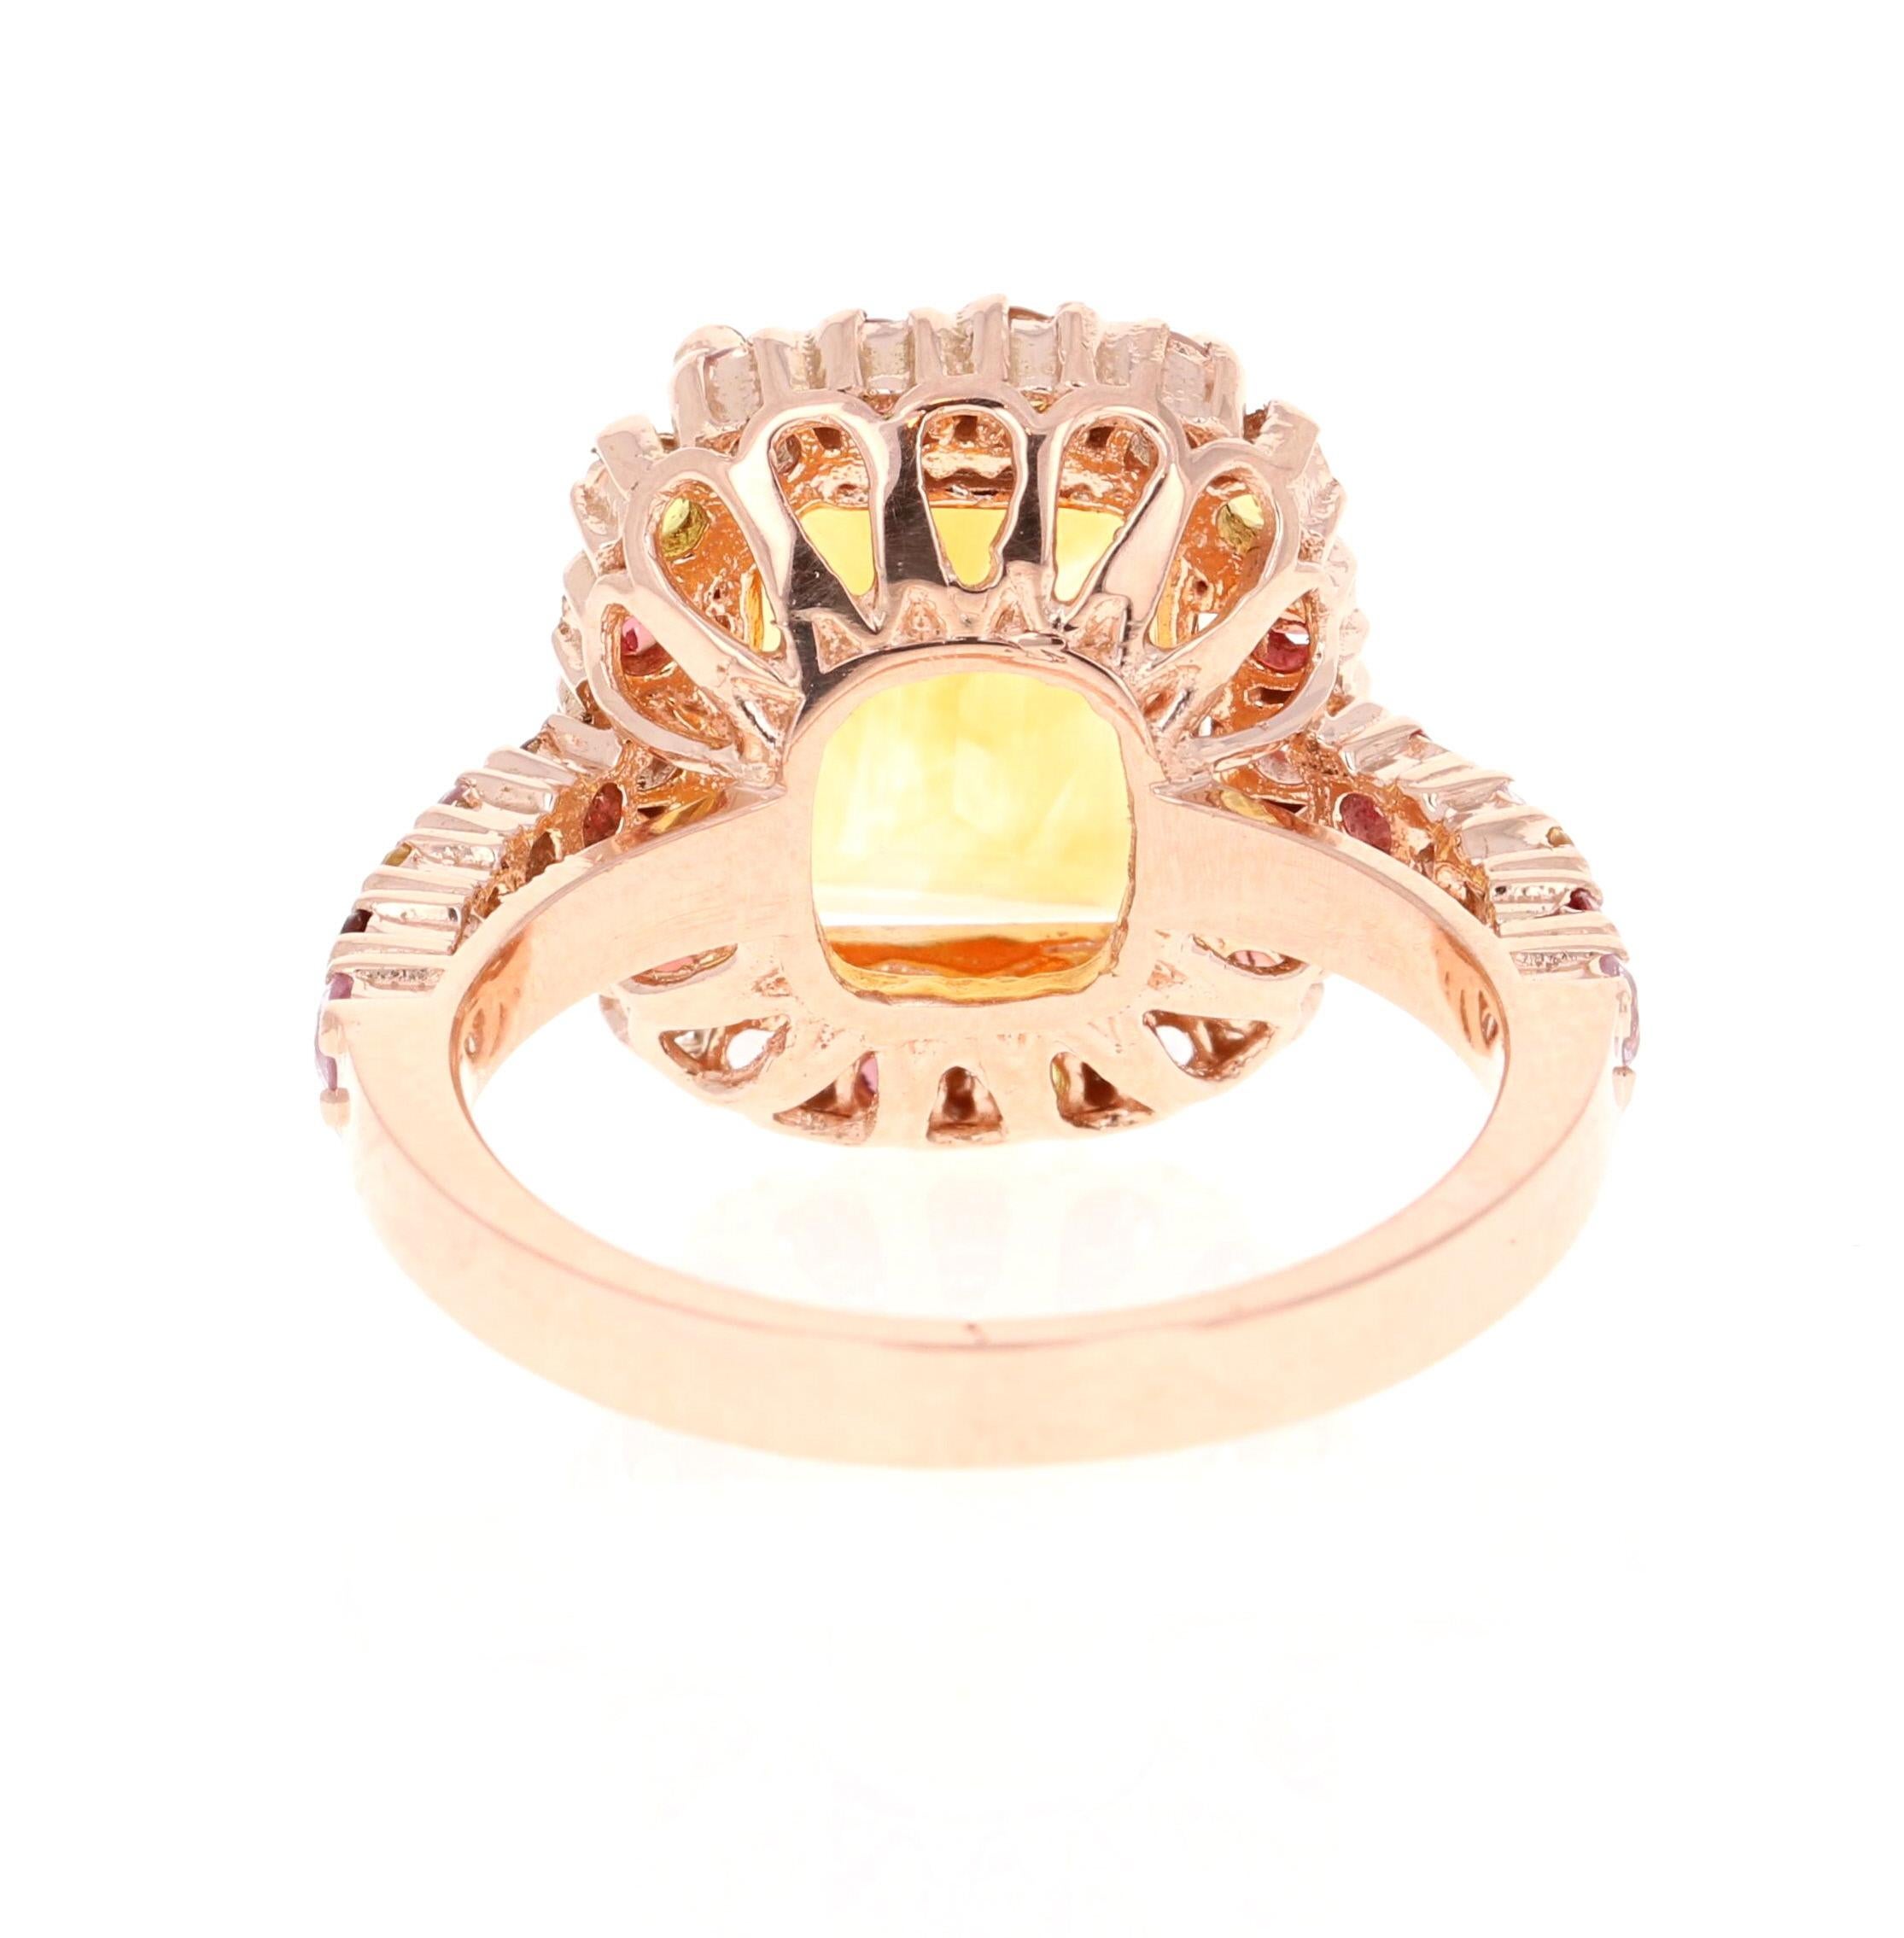 5.29 Carat Emerald Cut Citrine Sapphire Rose Gold Ring In New Condition For Sale In Los Angeles, CA